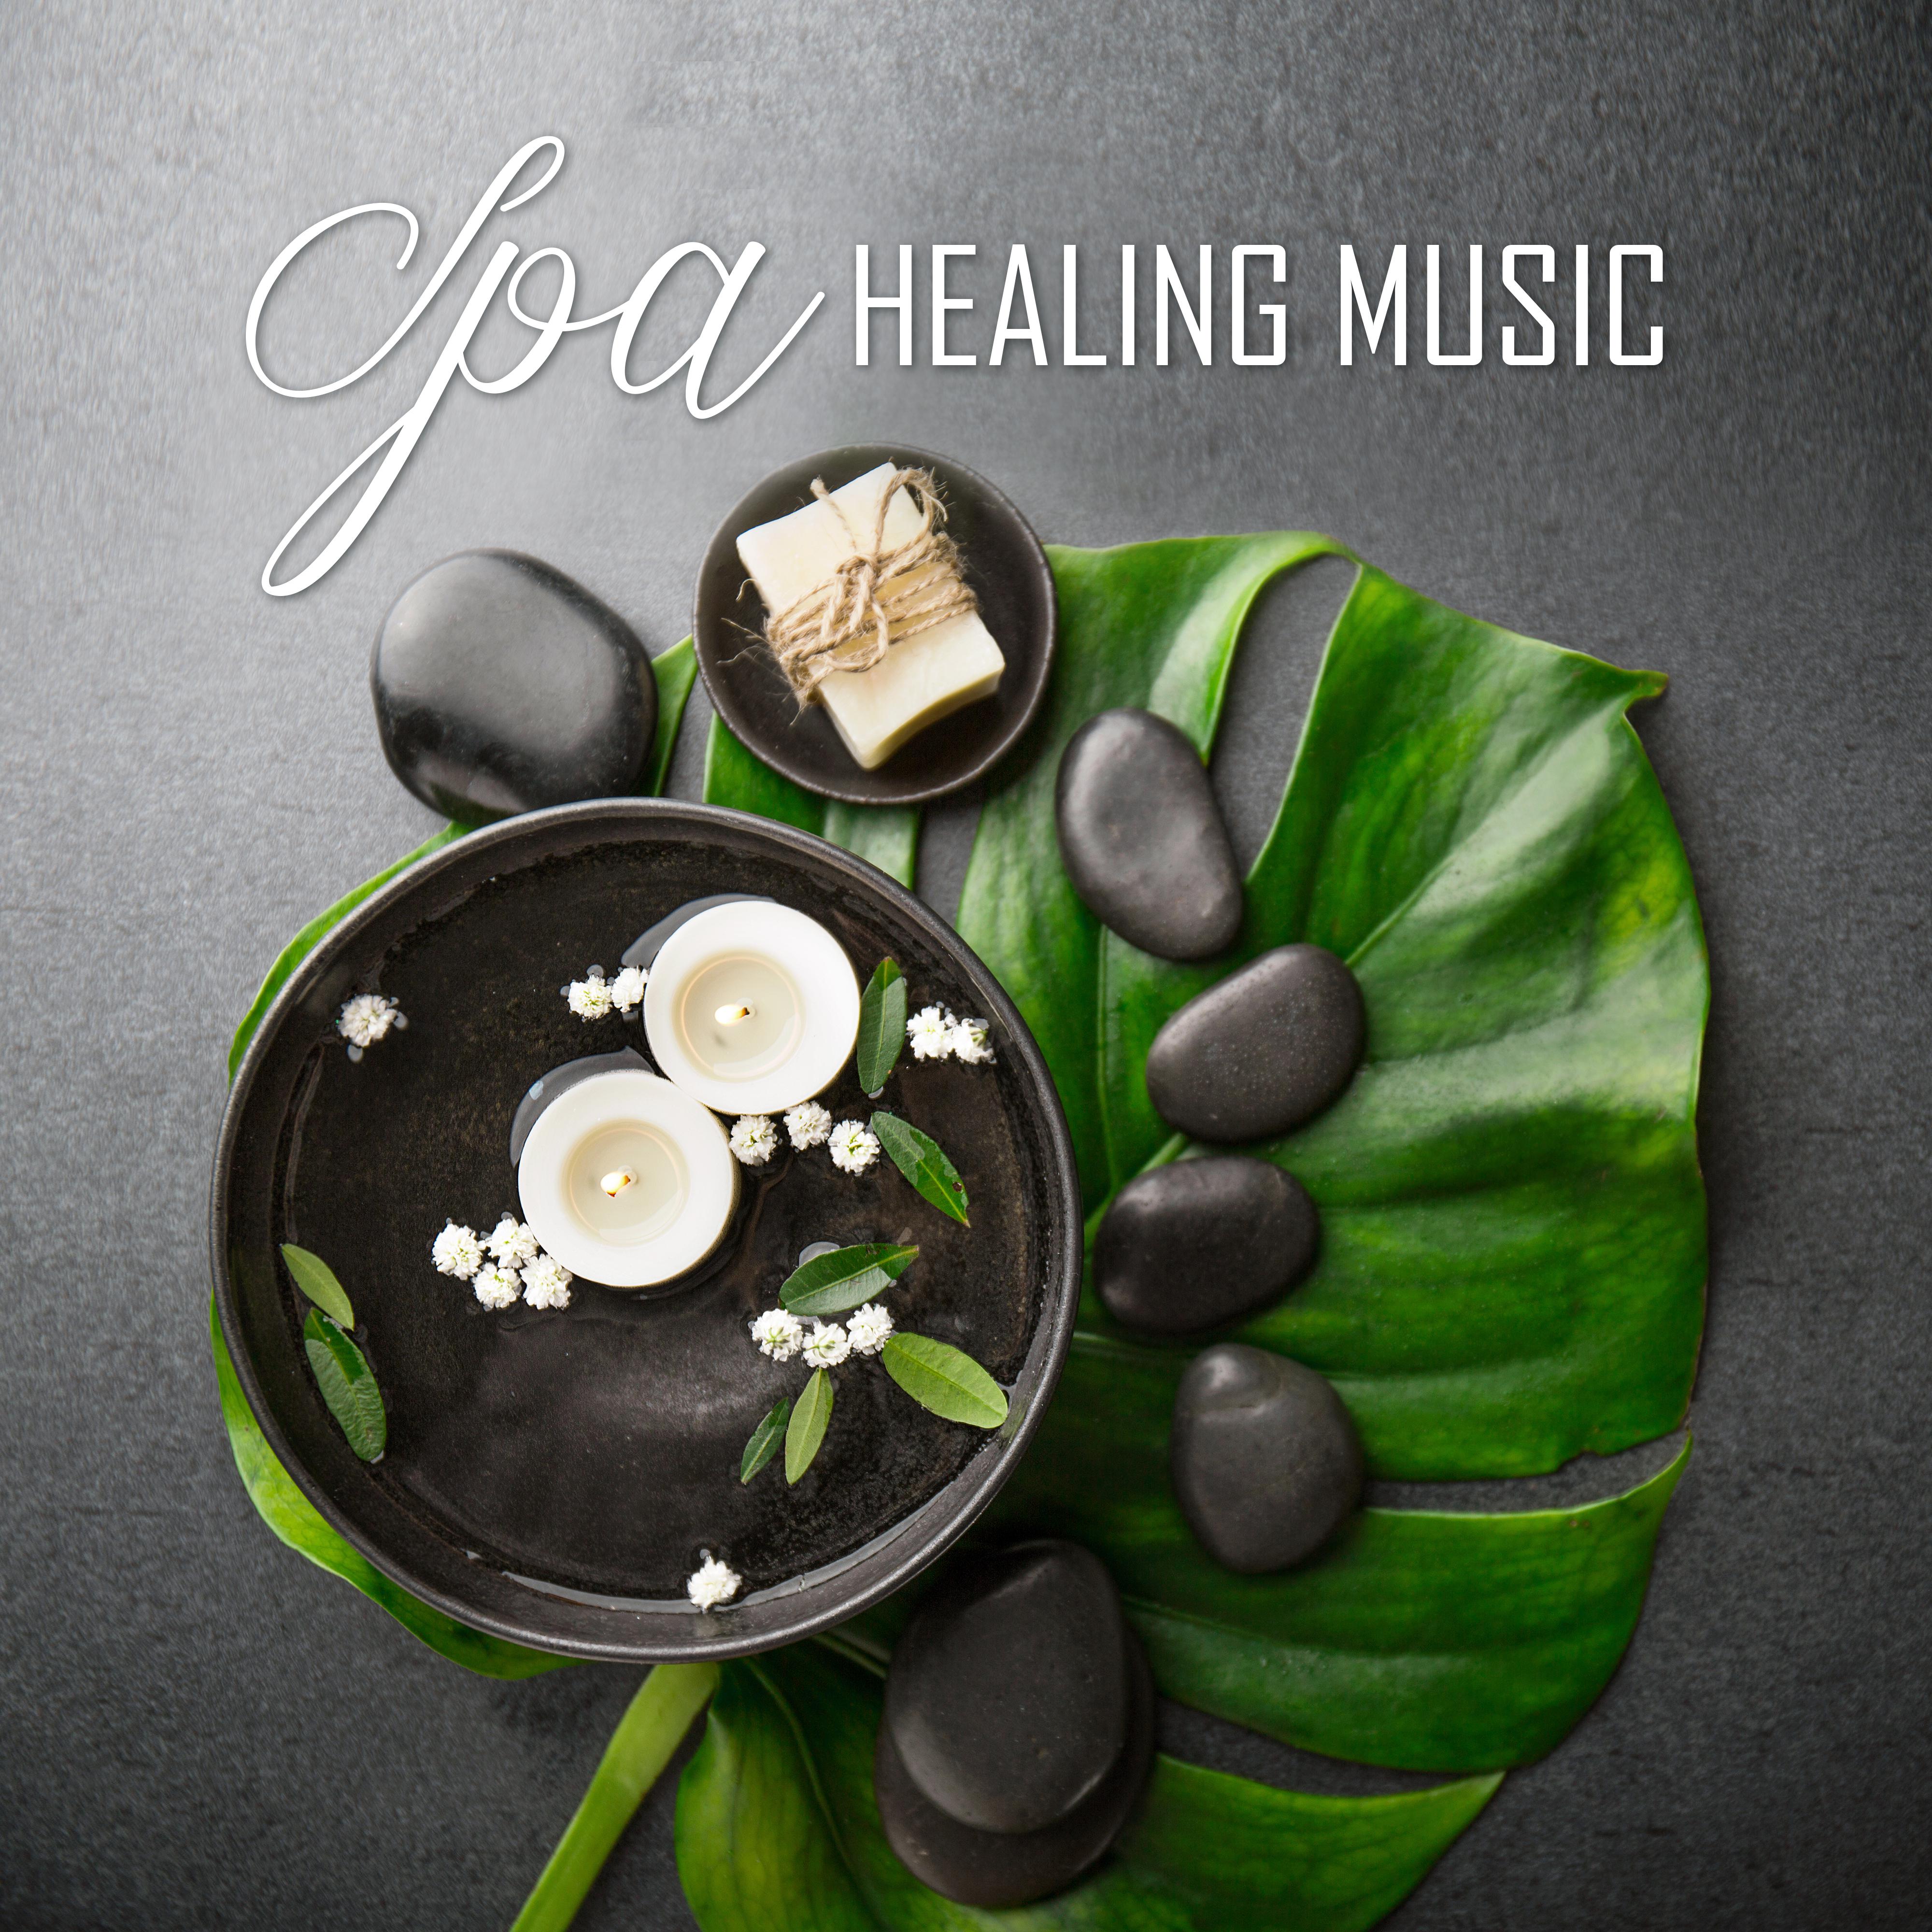 Spa Healing Music: Relaxing Music Therapy, Stress Relief, Calming Music for Spa, Massage, Relax, Wellness Sounds, Perfect Relax Zone, Zen